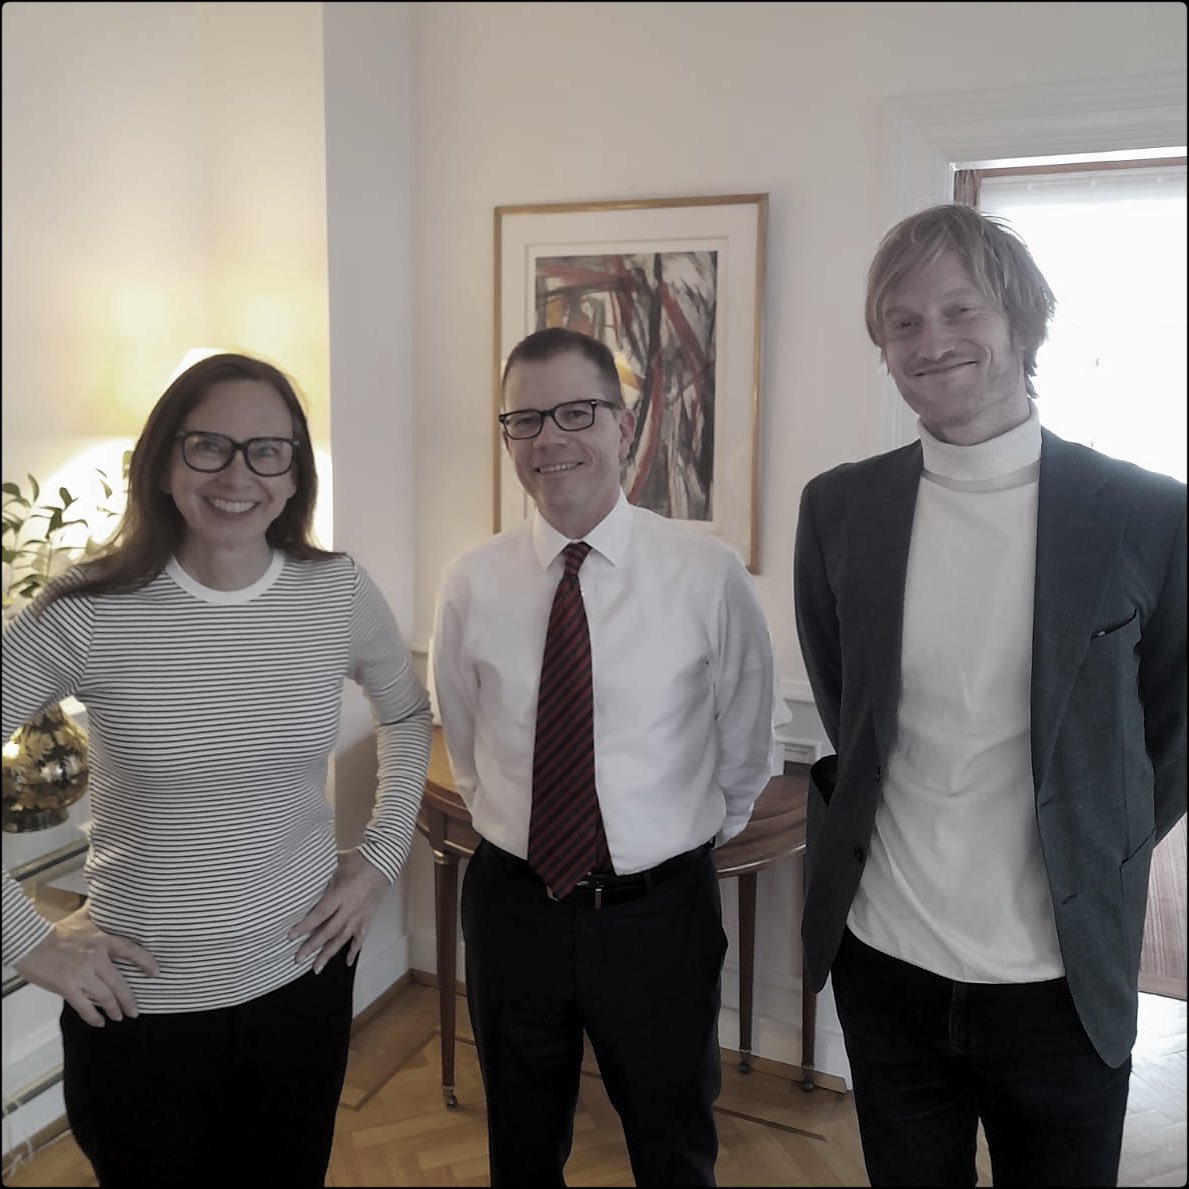 A pleasure to meet @SverrirNorland and @YrsaSig to talk about @icelandnoir and cooperation with @QuaisPolar in #Lyon